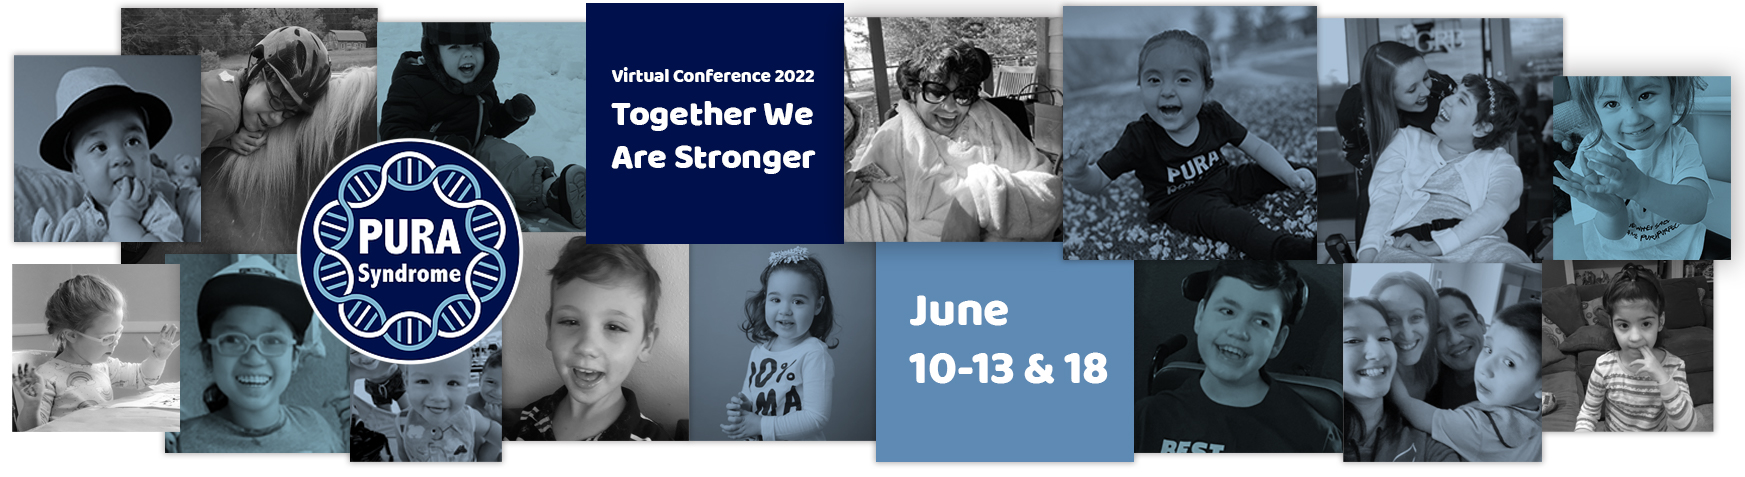 Pura Syndrome Conference 2022 – Together We Are Stronger